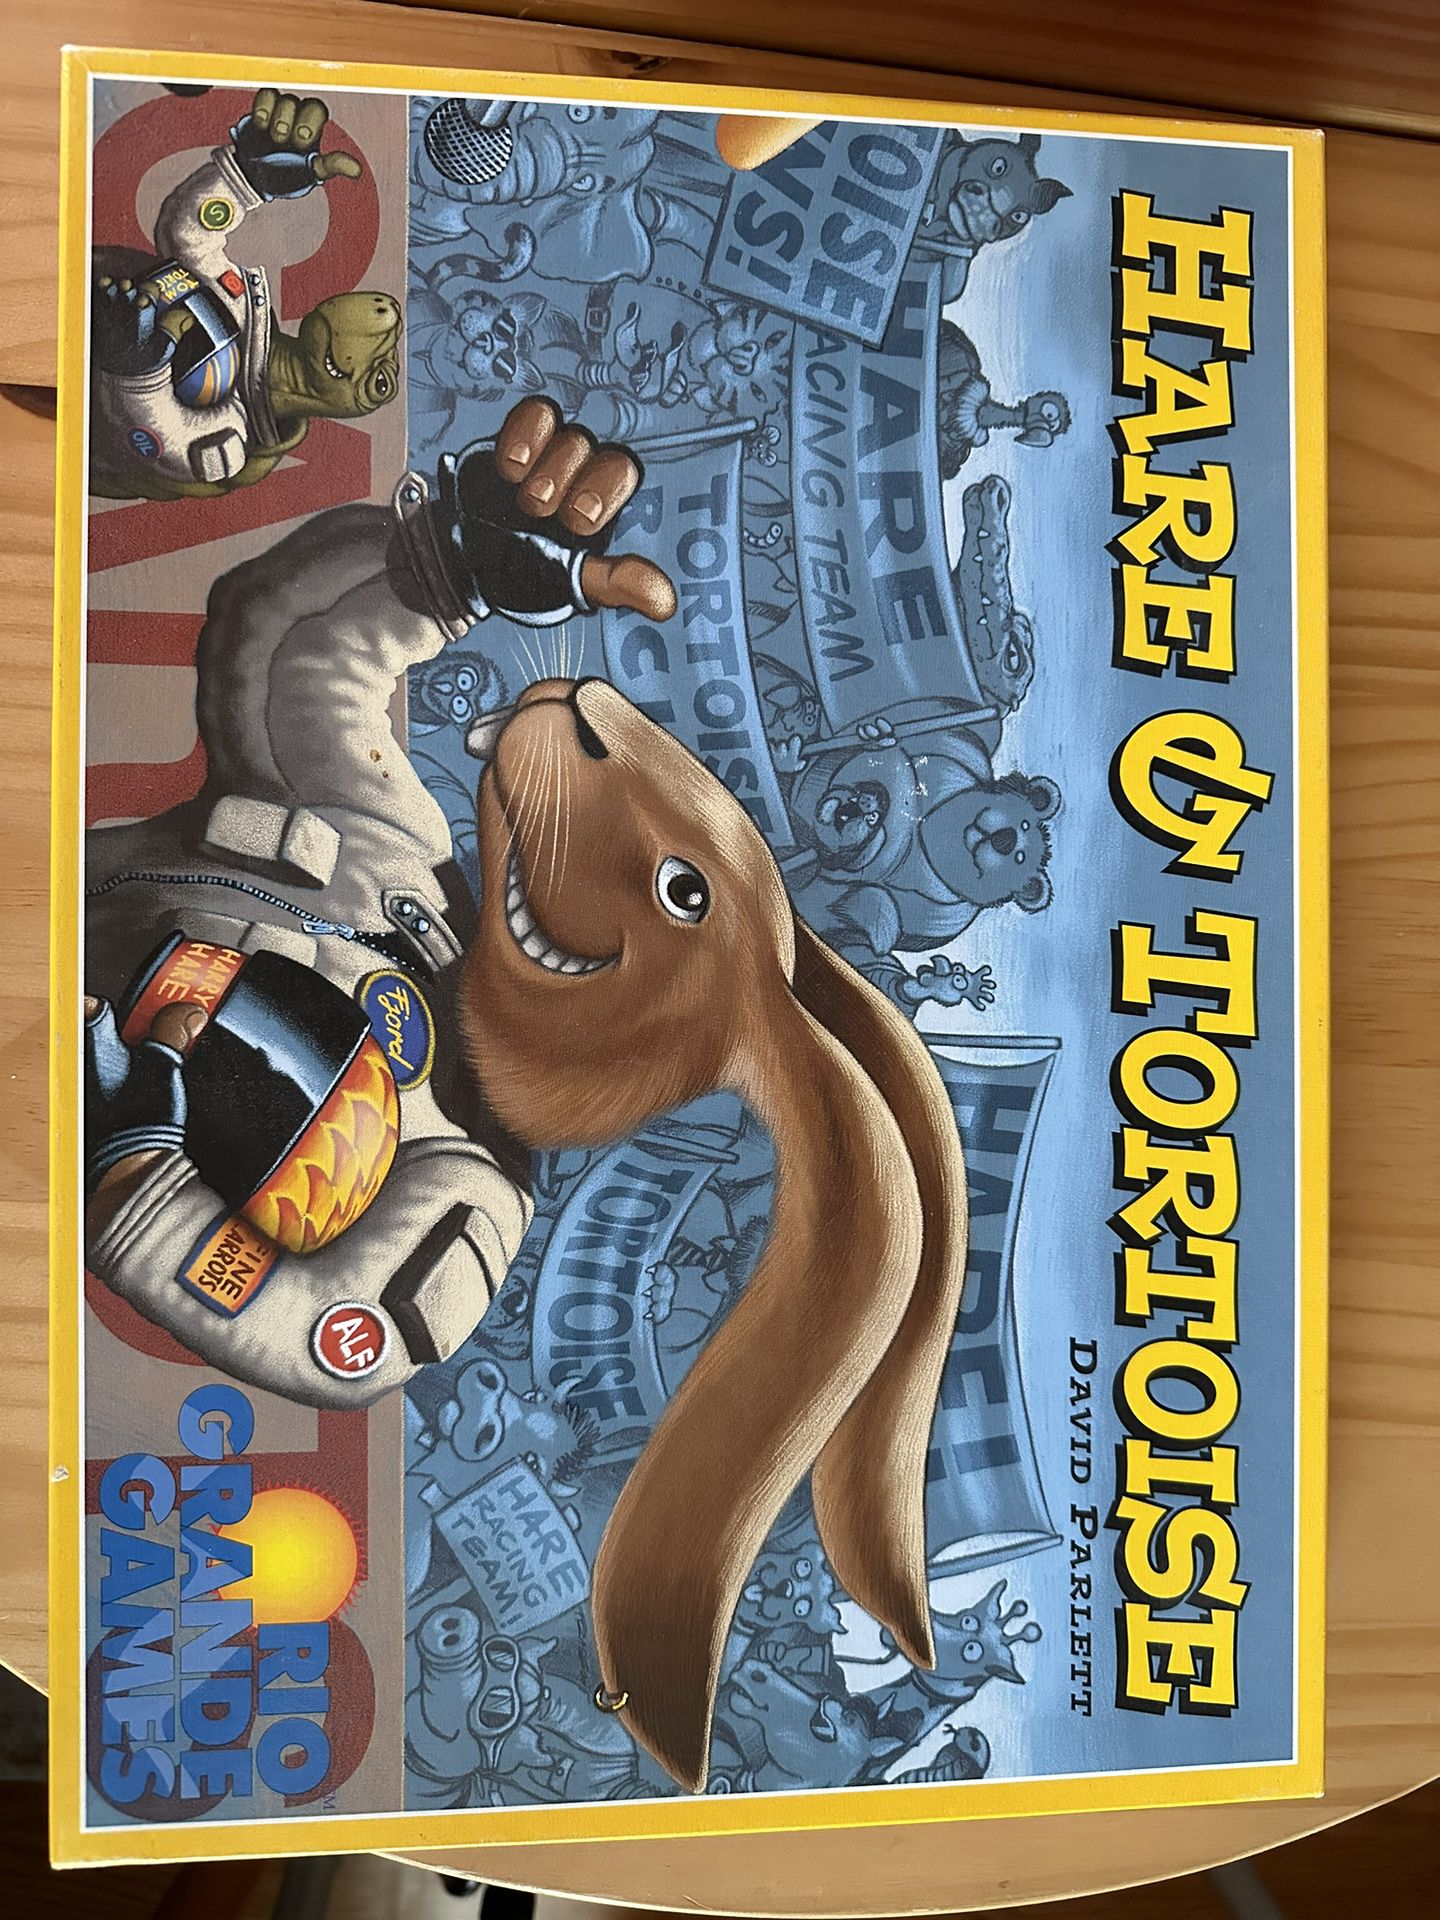 Hare And Tortoise Board Game